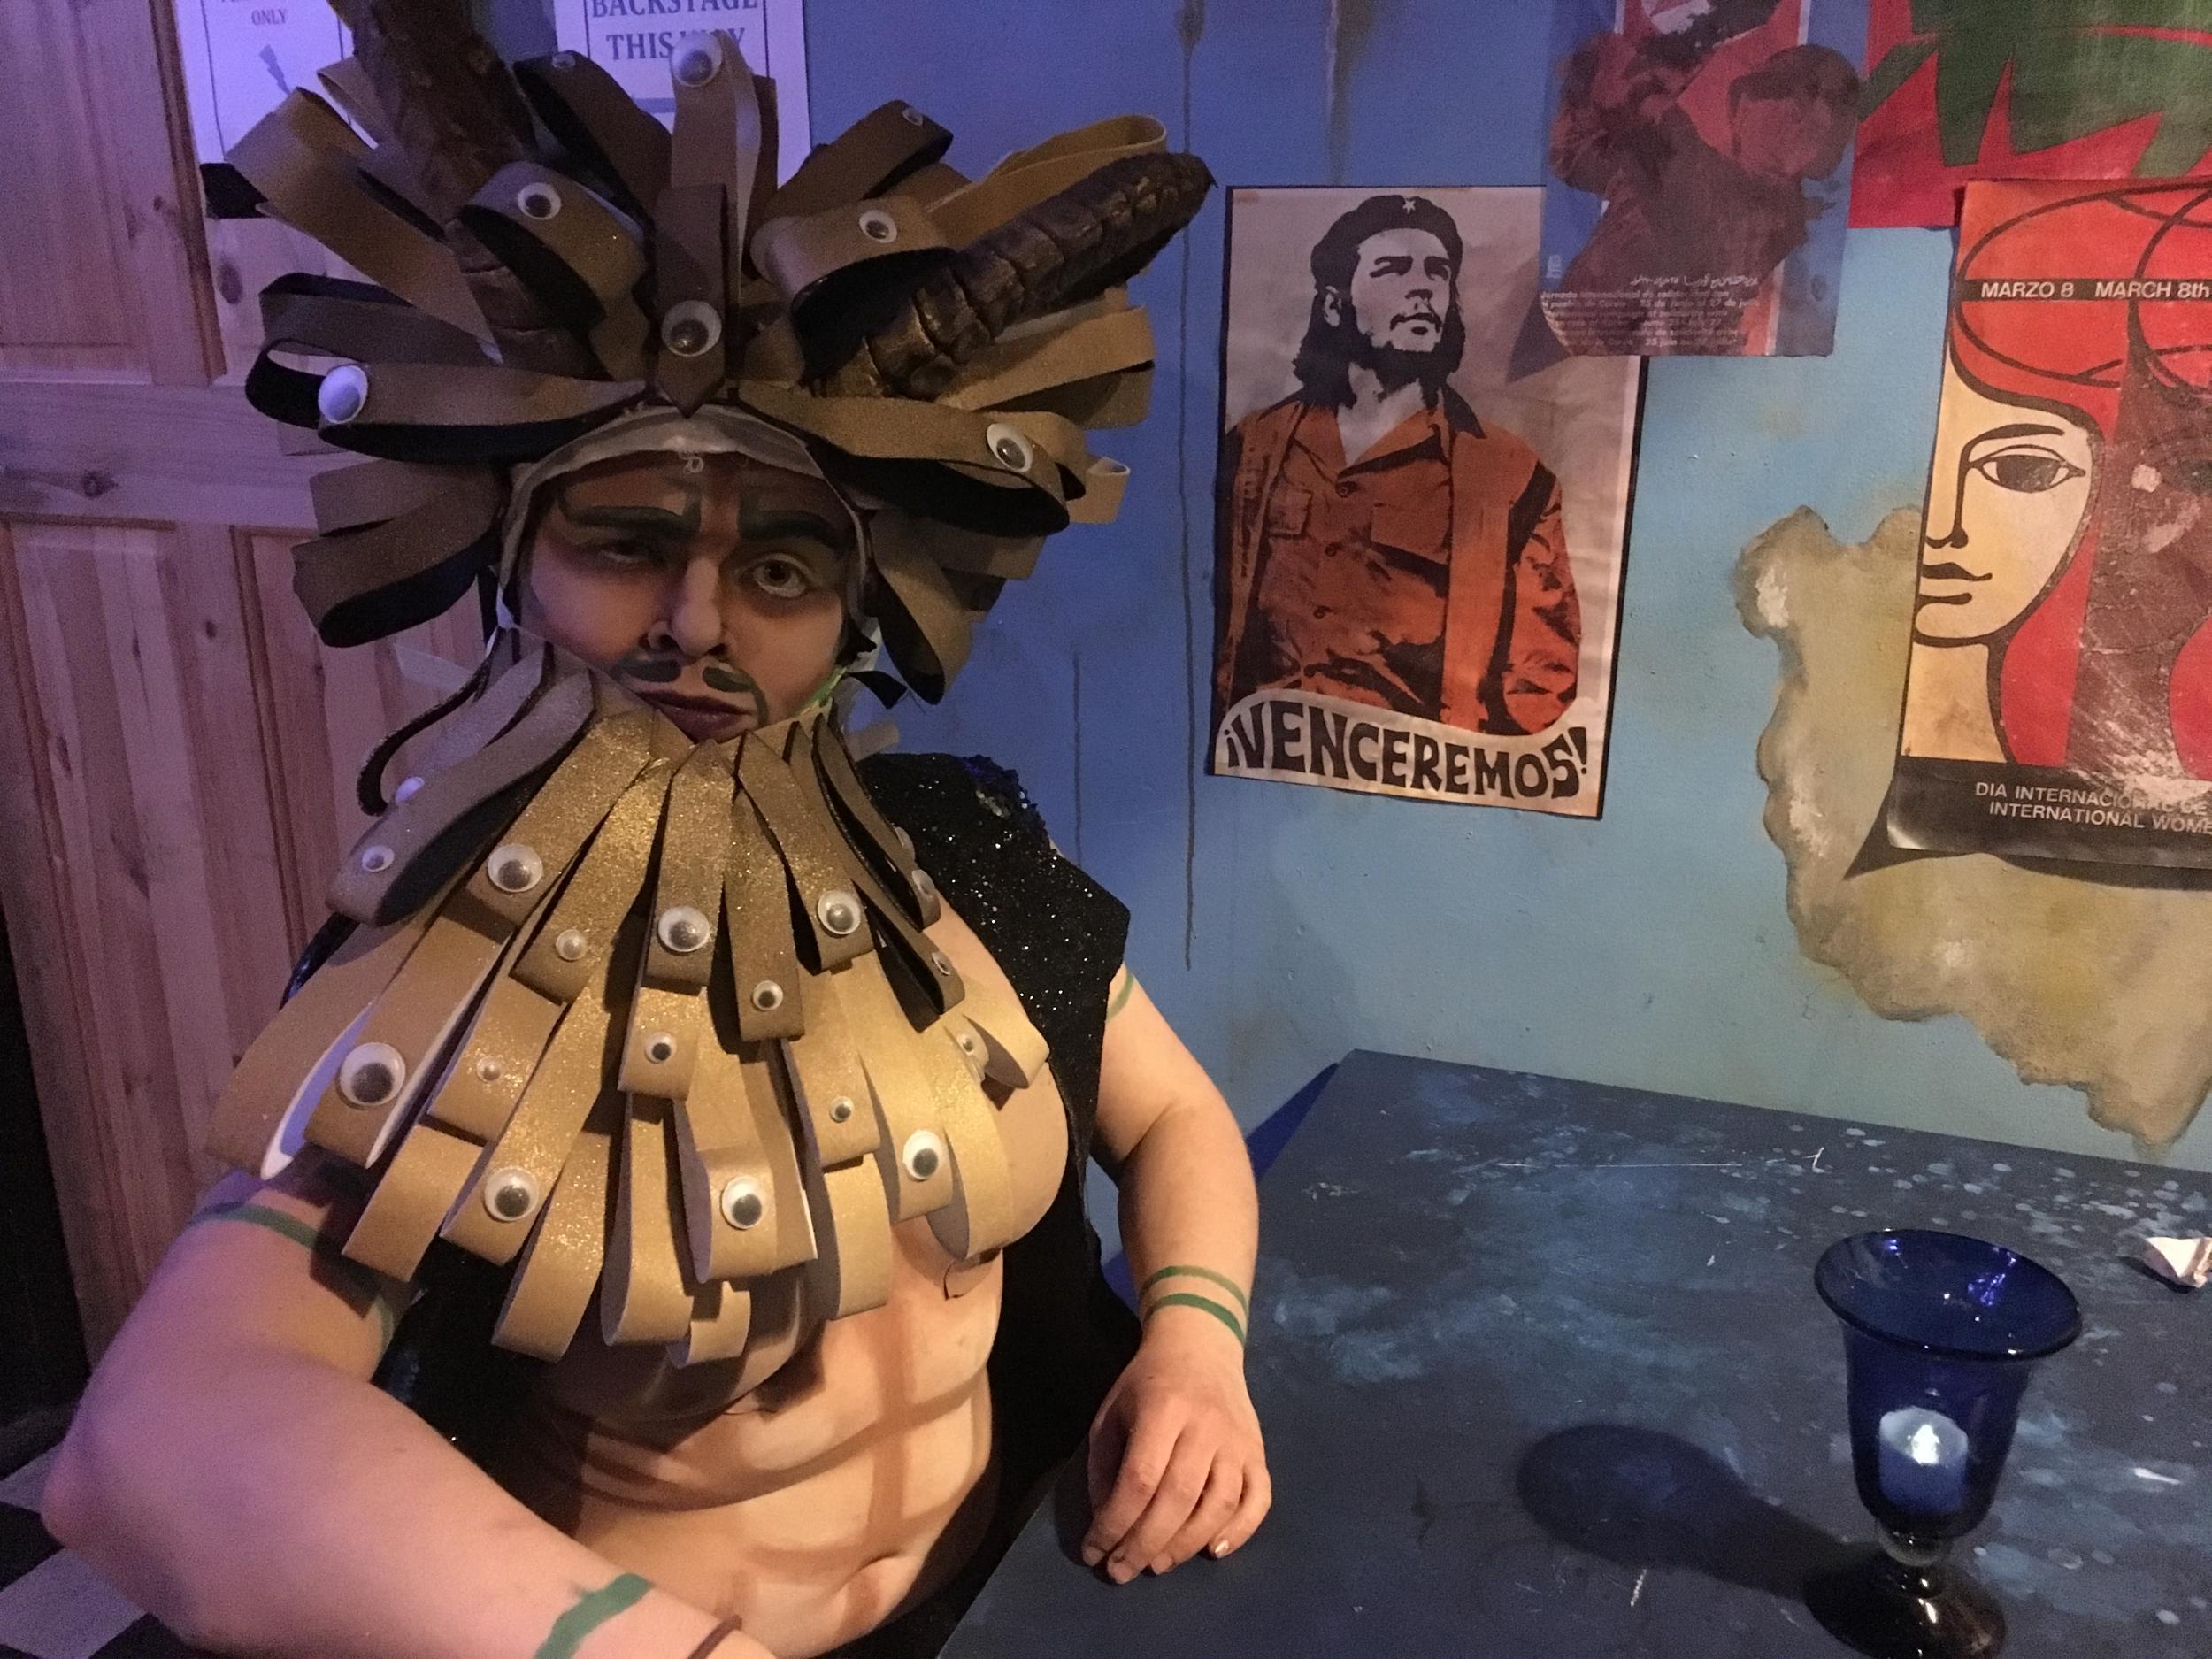 Oedipussi, the man of many costumes